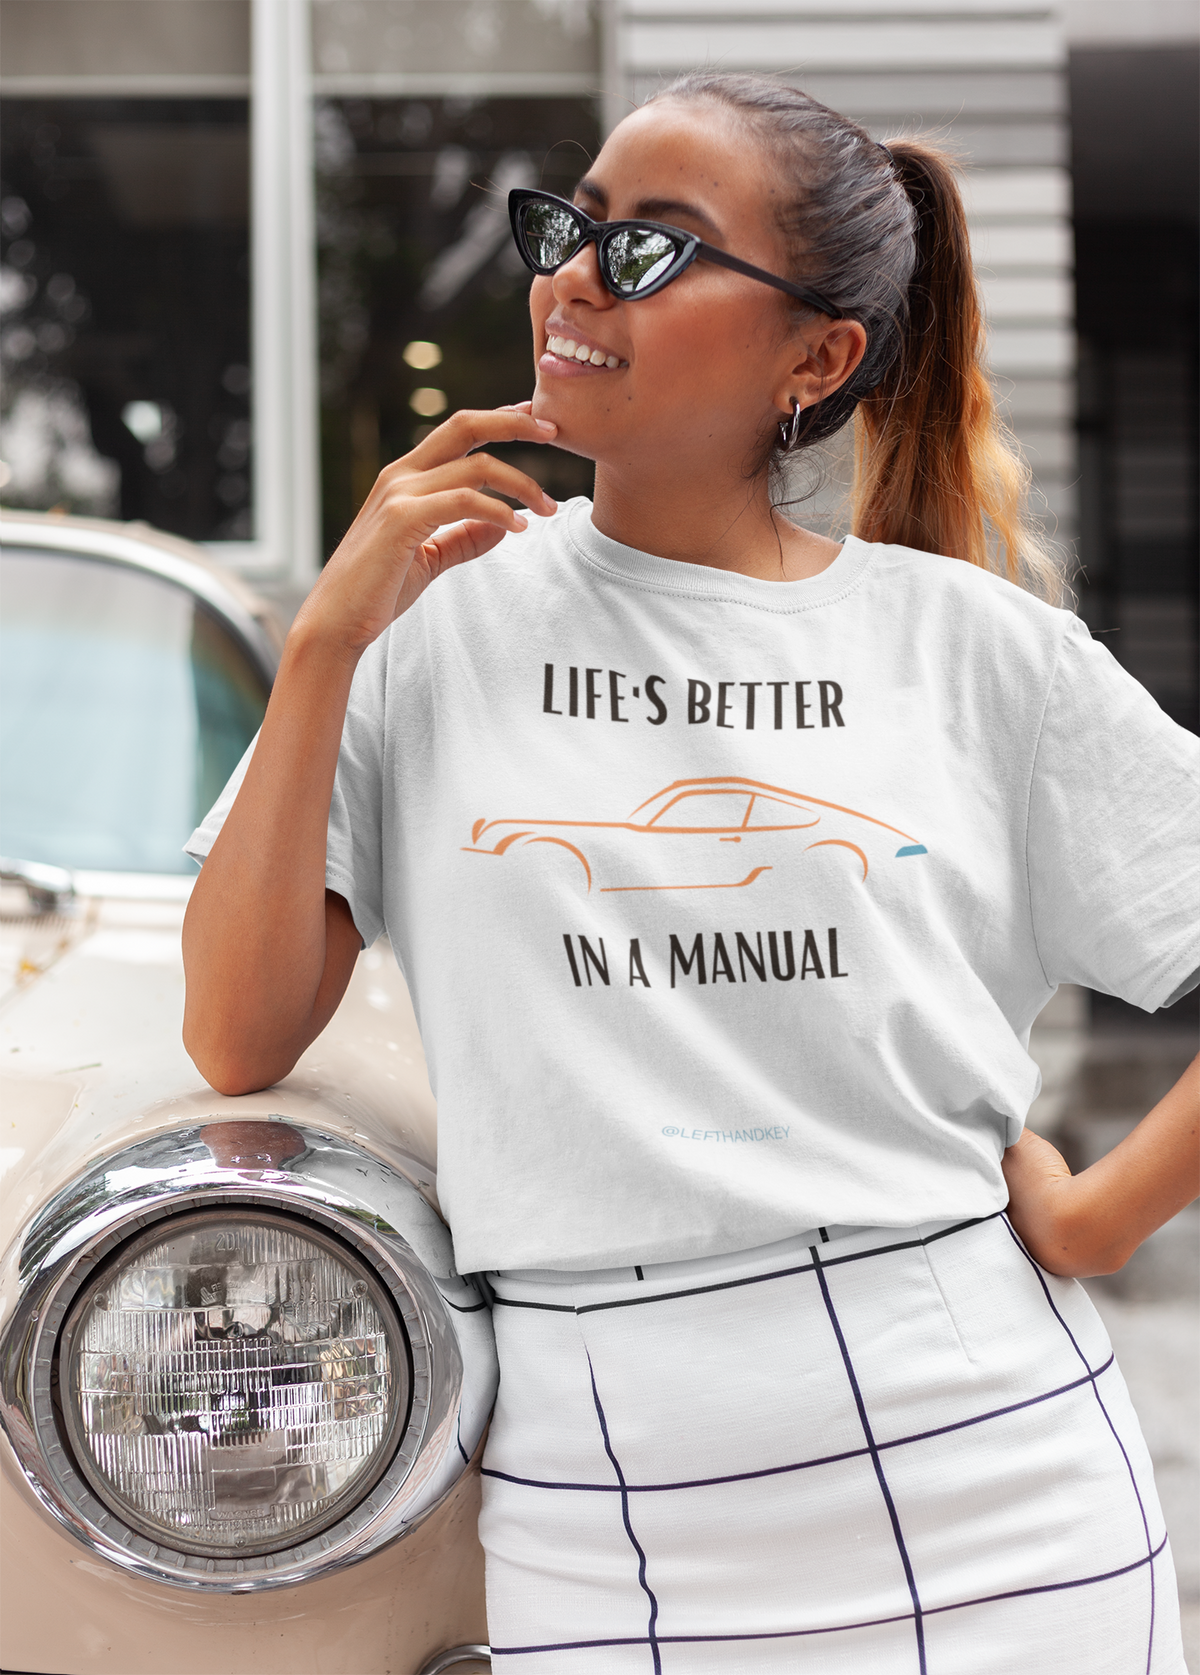 Life's Better In a Manual Unisex Tee